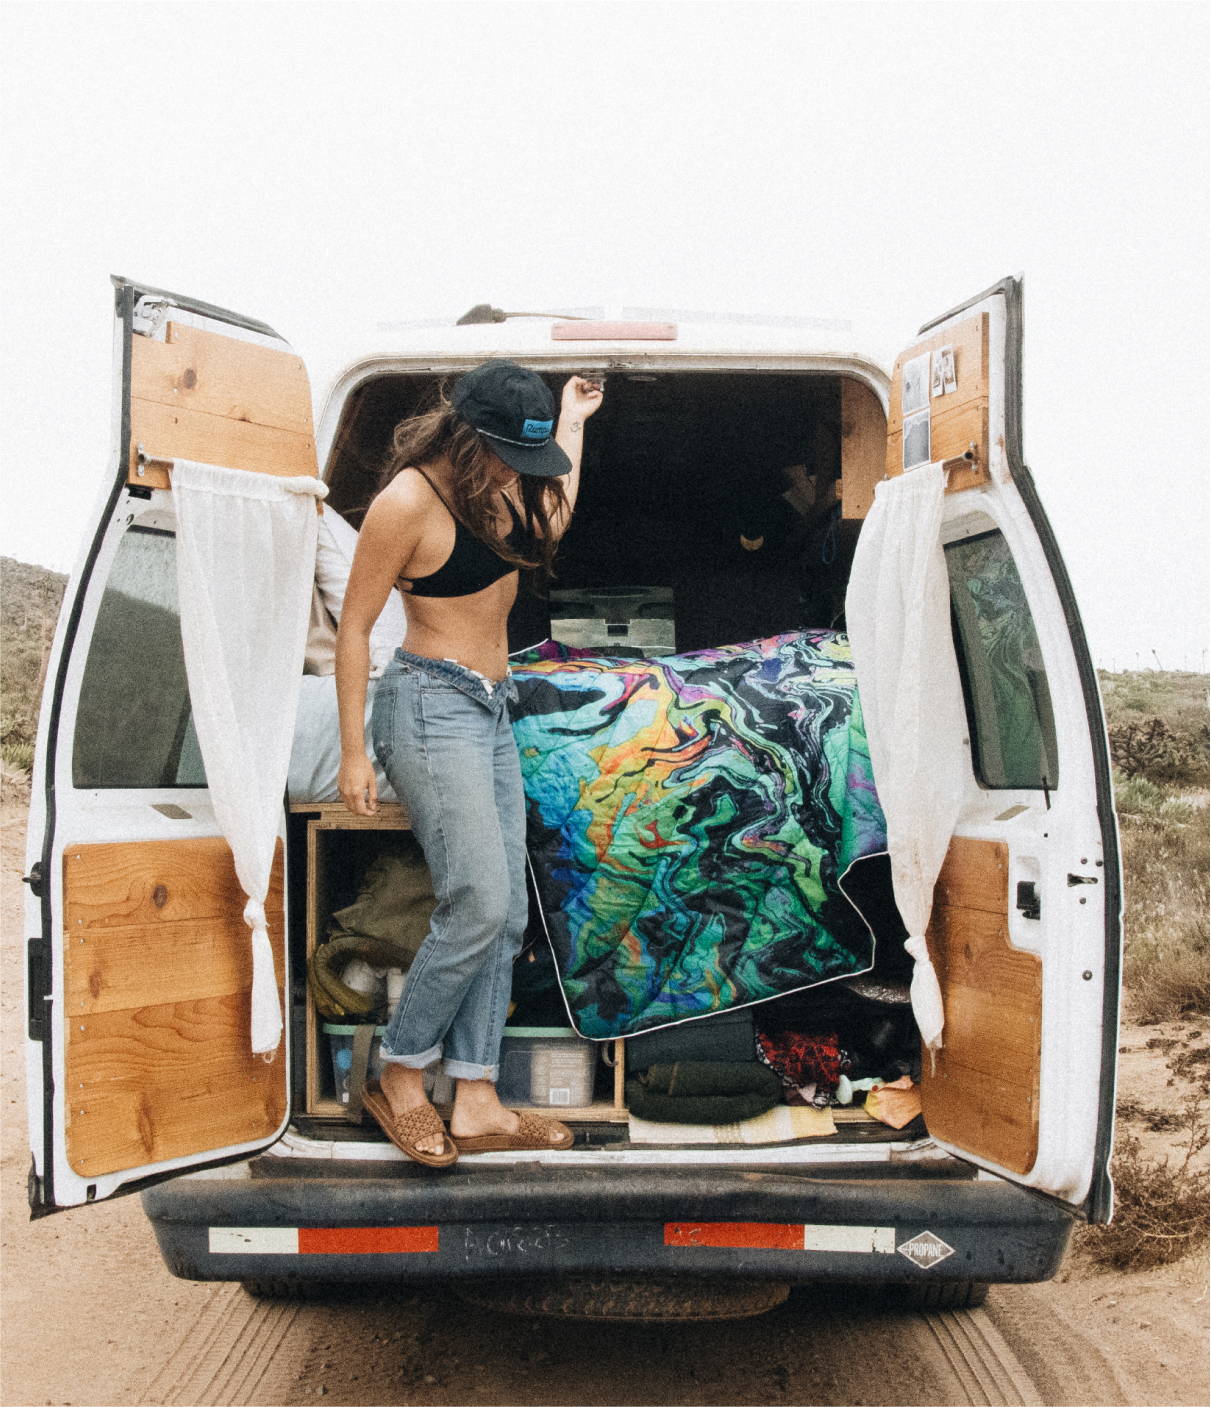 A woman stands in the back of a van with her Rumpl blanket, ready for a journey.